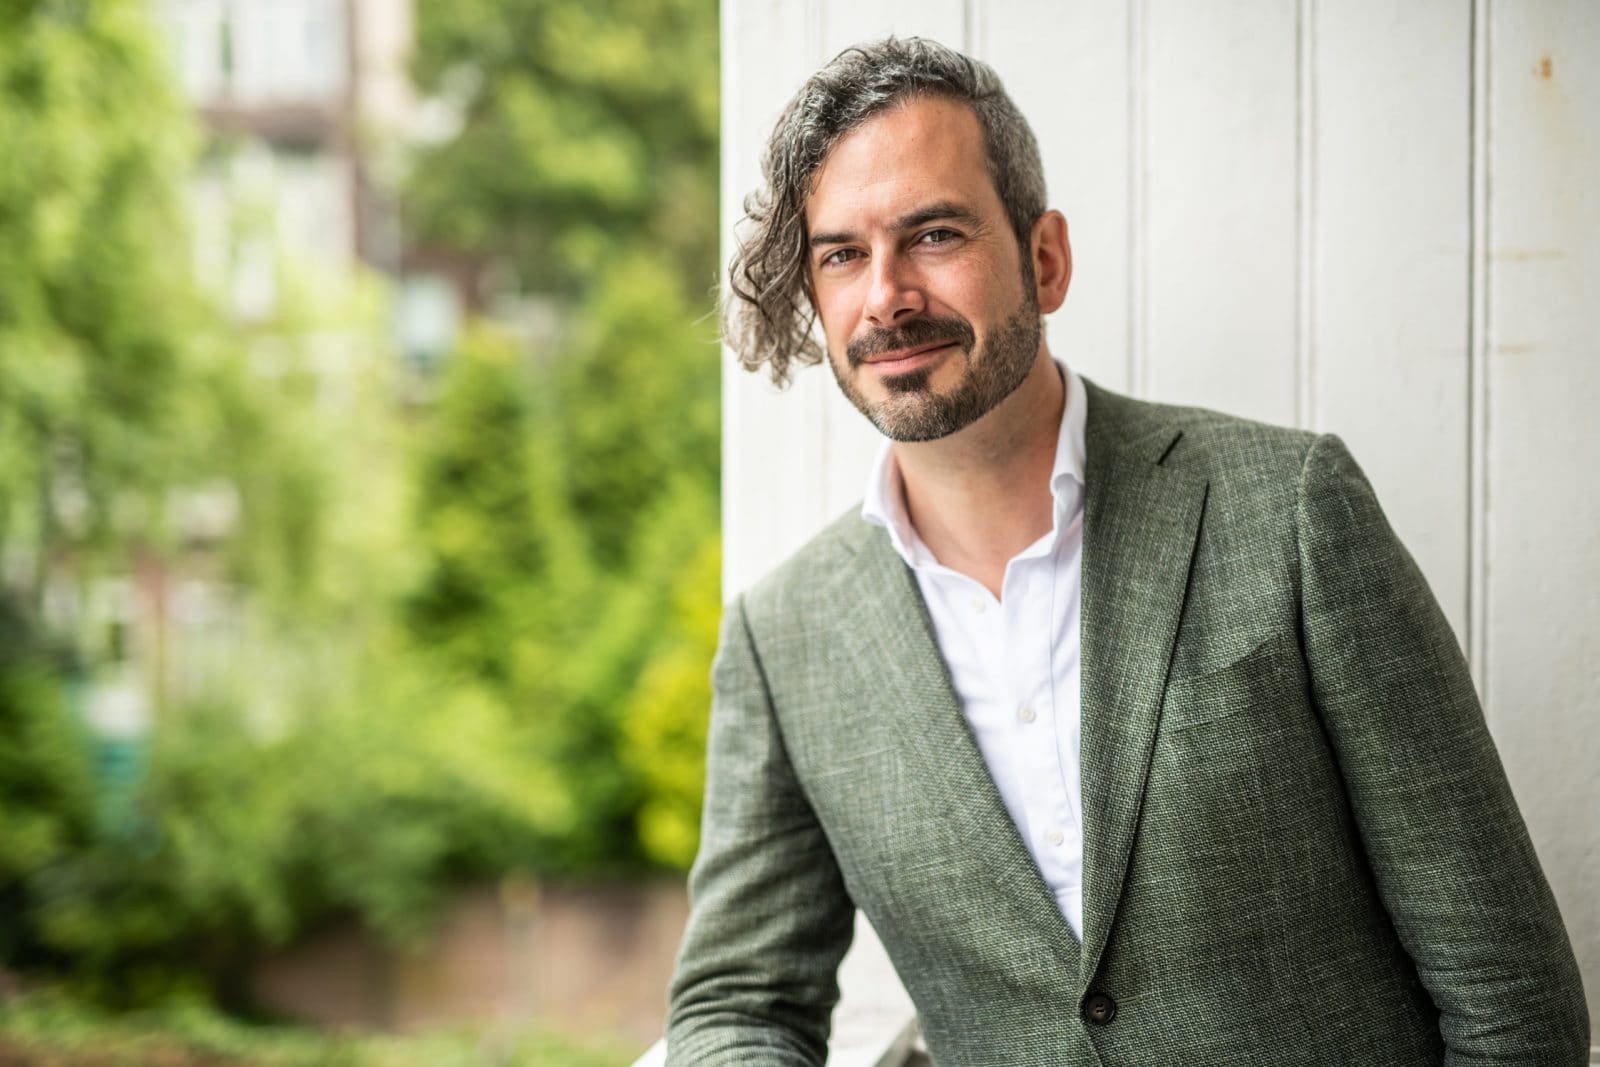 Tobias Kokkelmans starts as director of the Dutch Theatre Festival: 'More exchange between different groups in audiences and creators.'